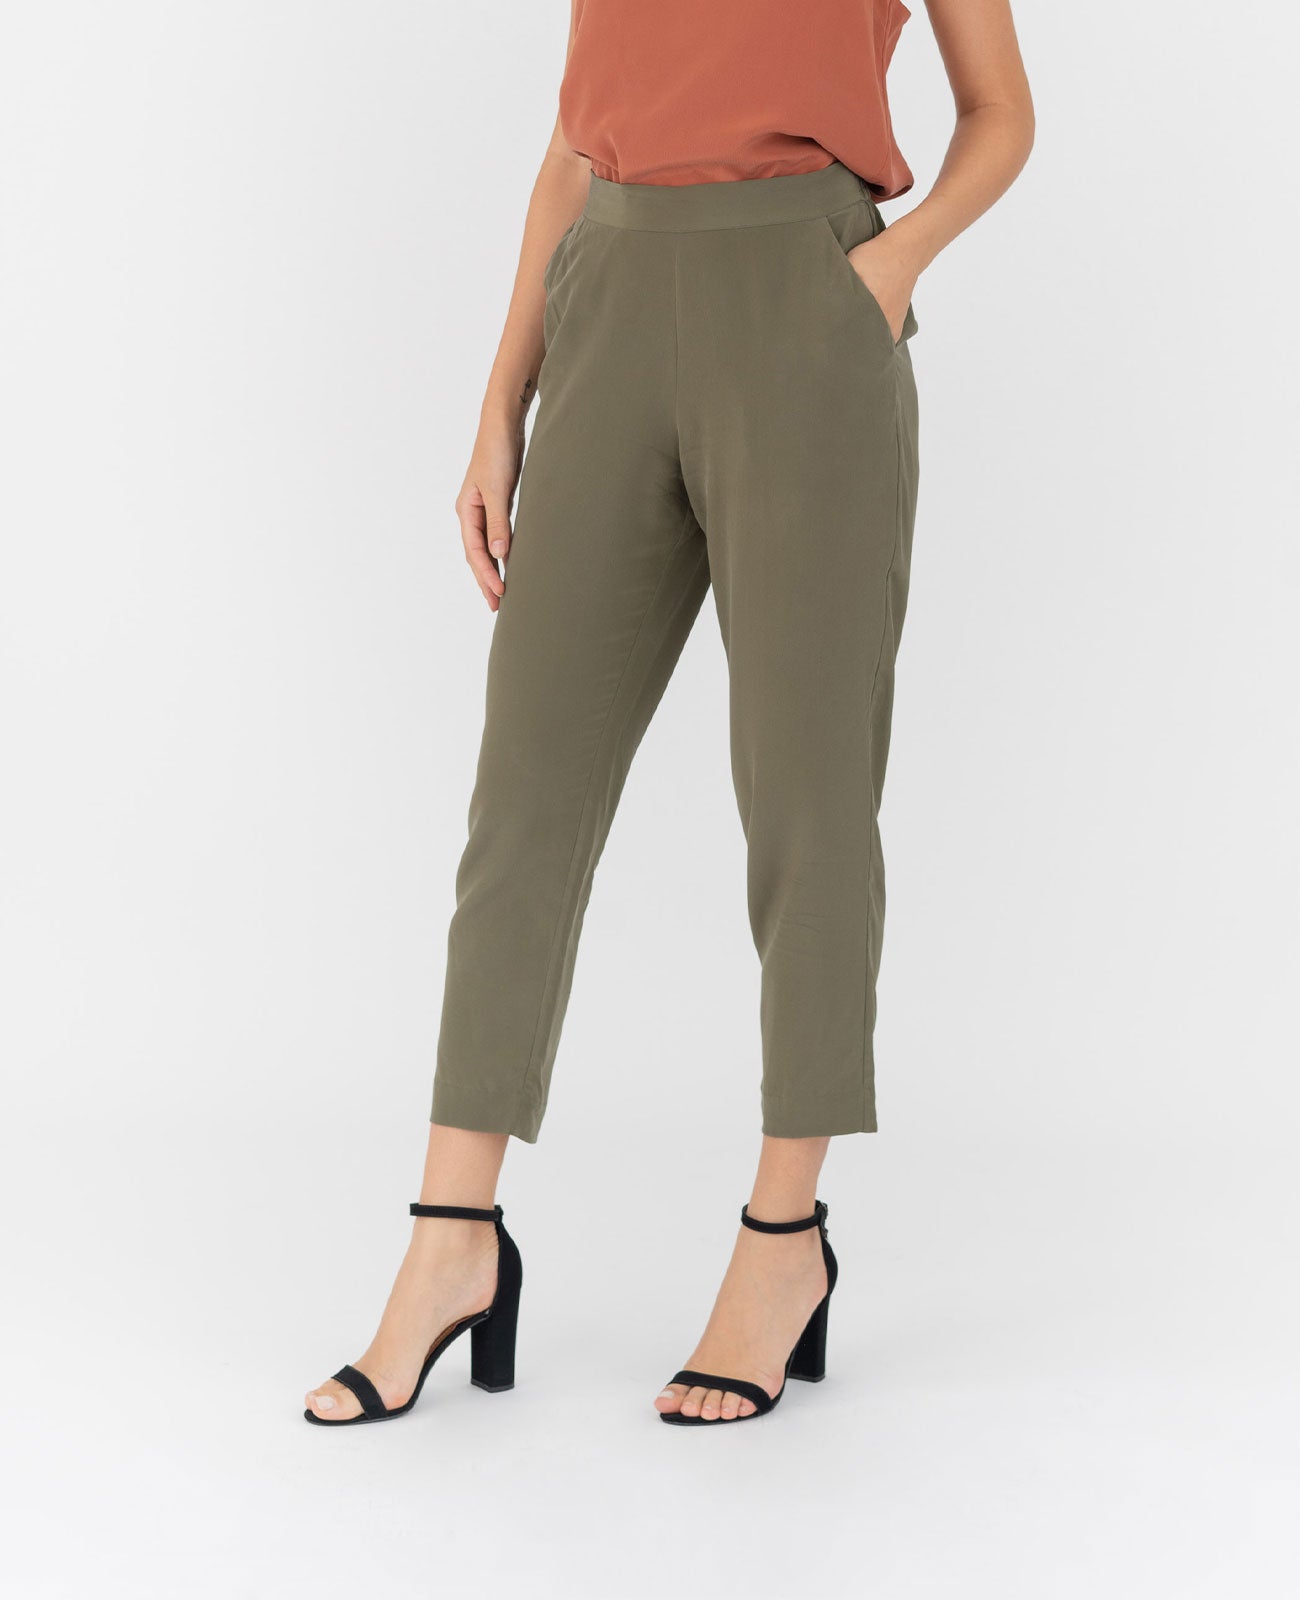 Buy Ankle-Length Flat-Front Pants Online at Best Prices in India